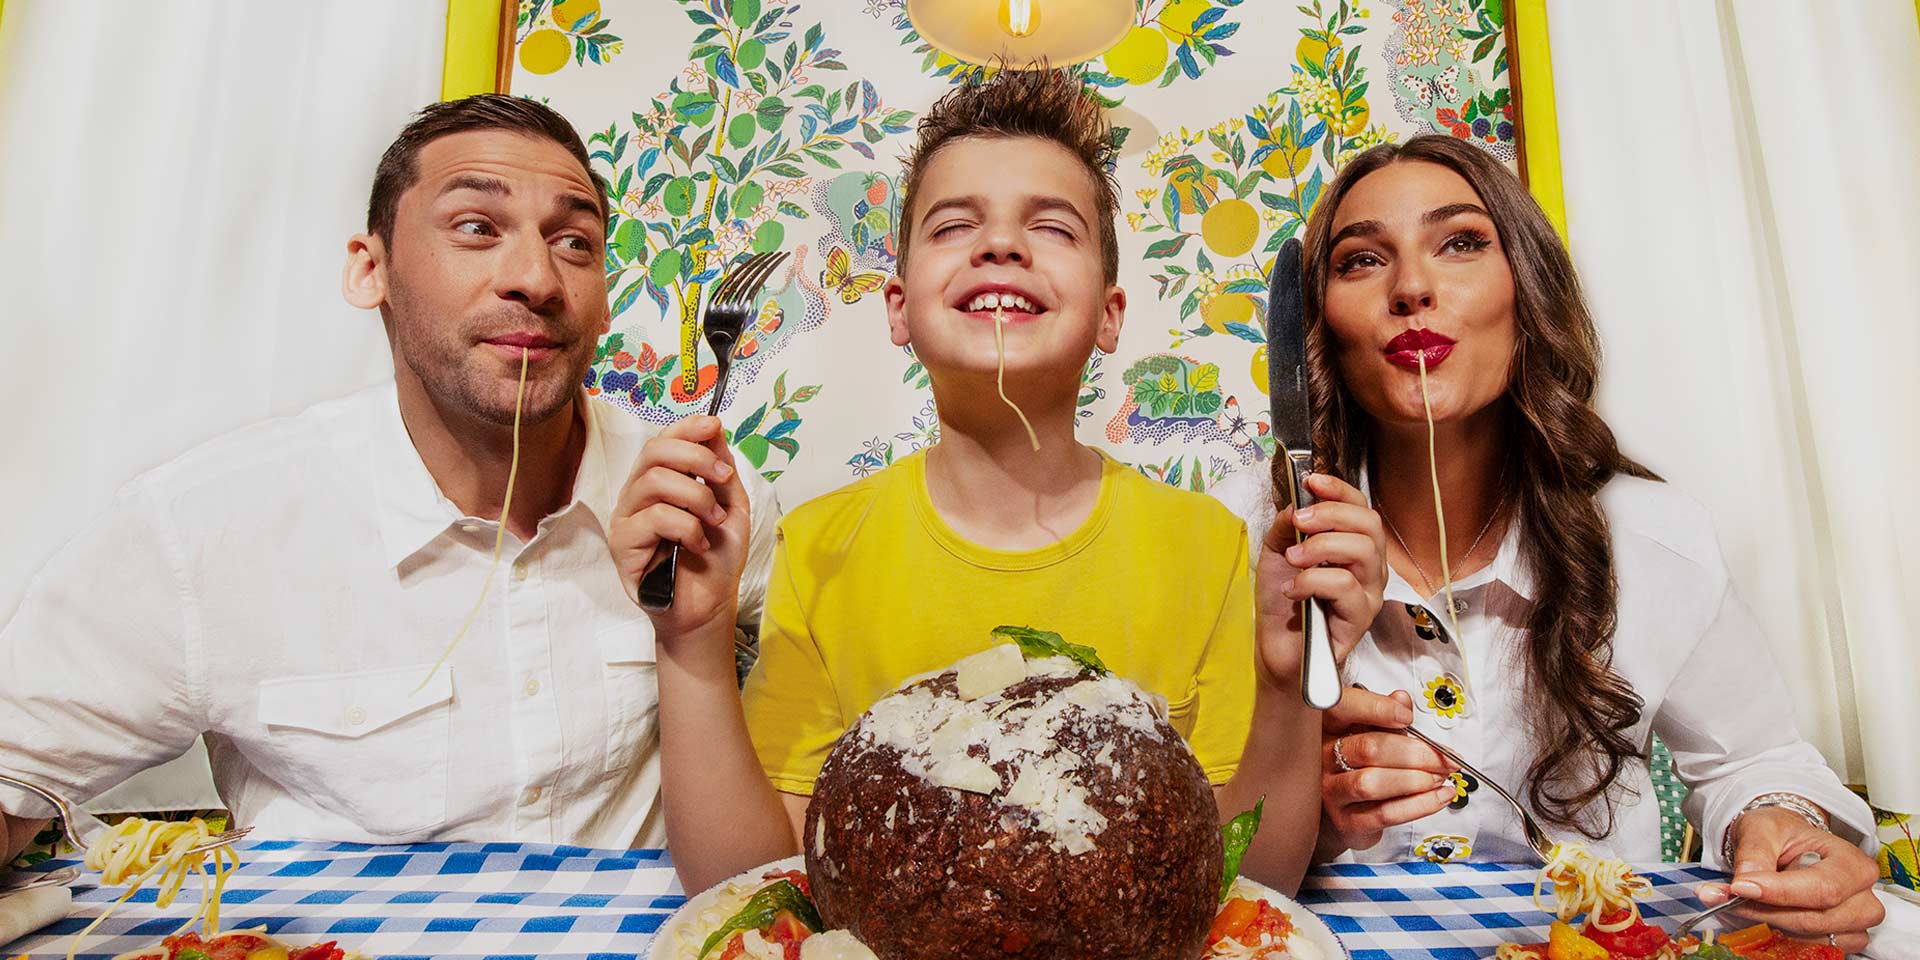 parents with their young son are slurping on spaghetti noodles and smiling